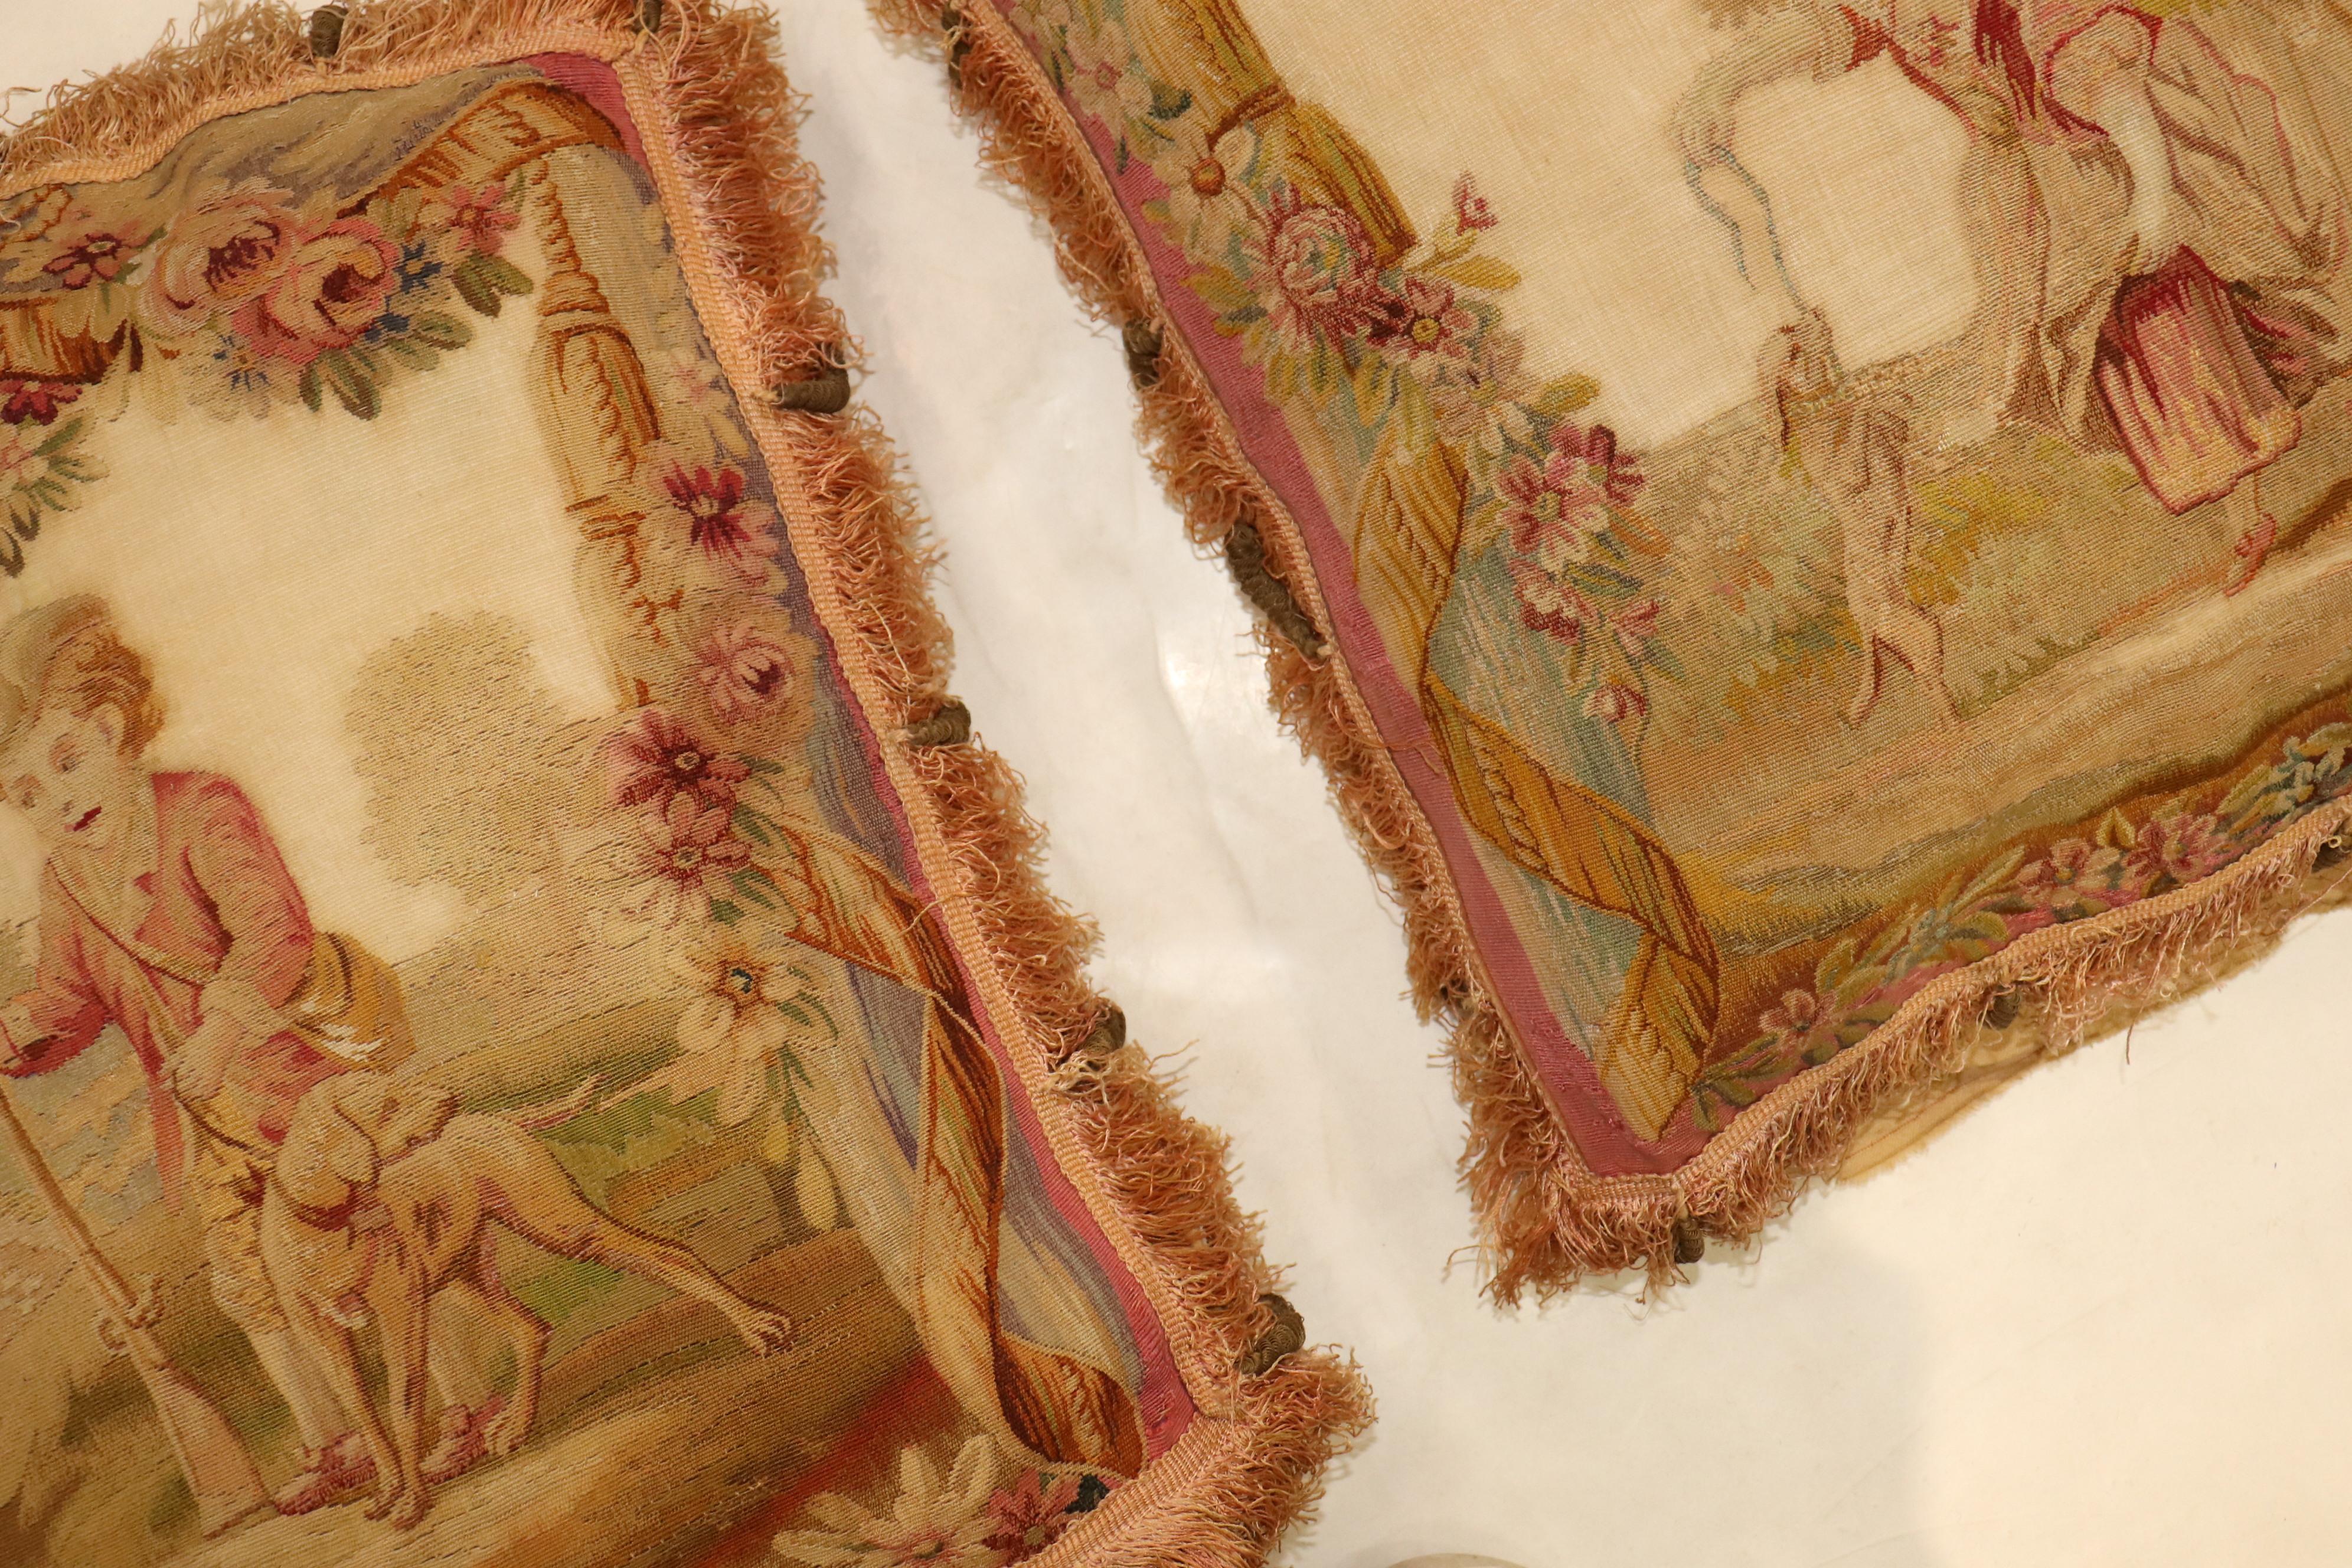 A set of late 18th century Aubusson tapestry pillows made with fine quality wool and silk. One pillow has Man with his dog while the other has a women with a small puppy. Backed in velvet. Each Measuring 21” x 21” individually. Both sewn shut.
 
 